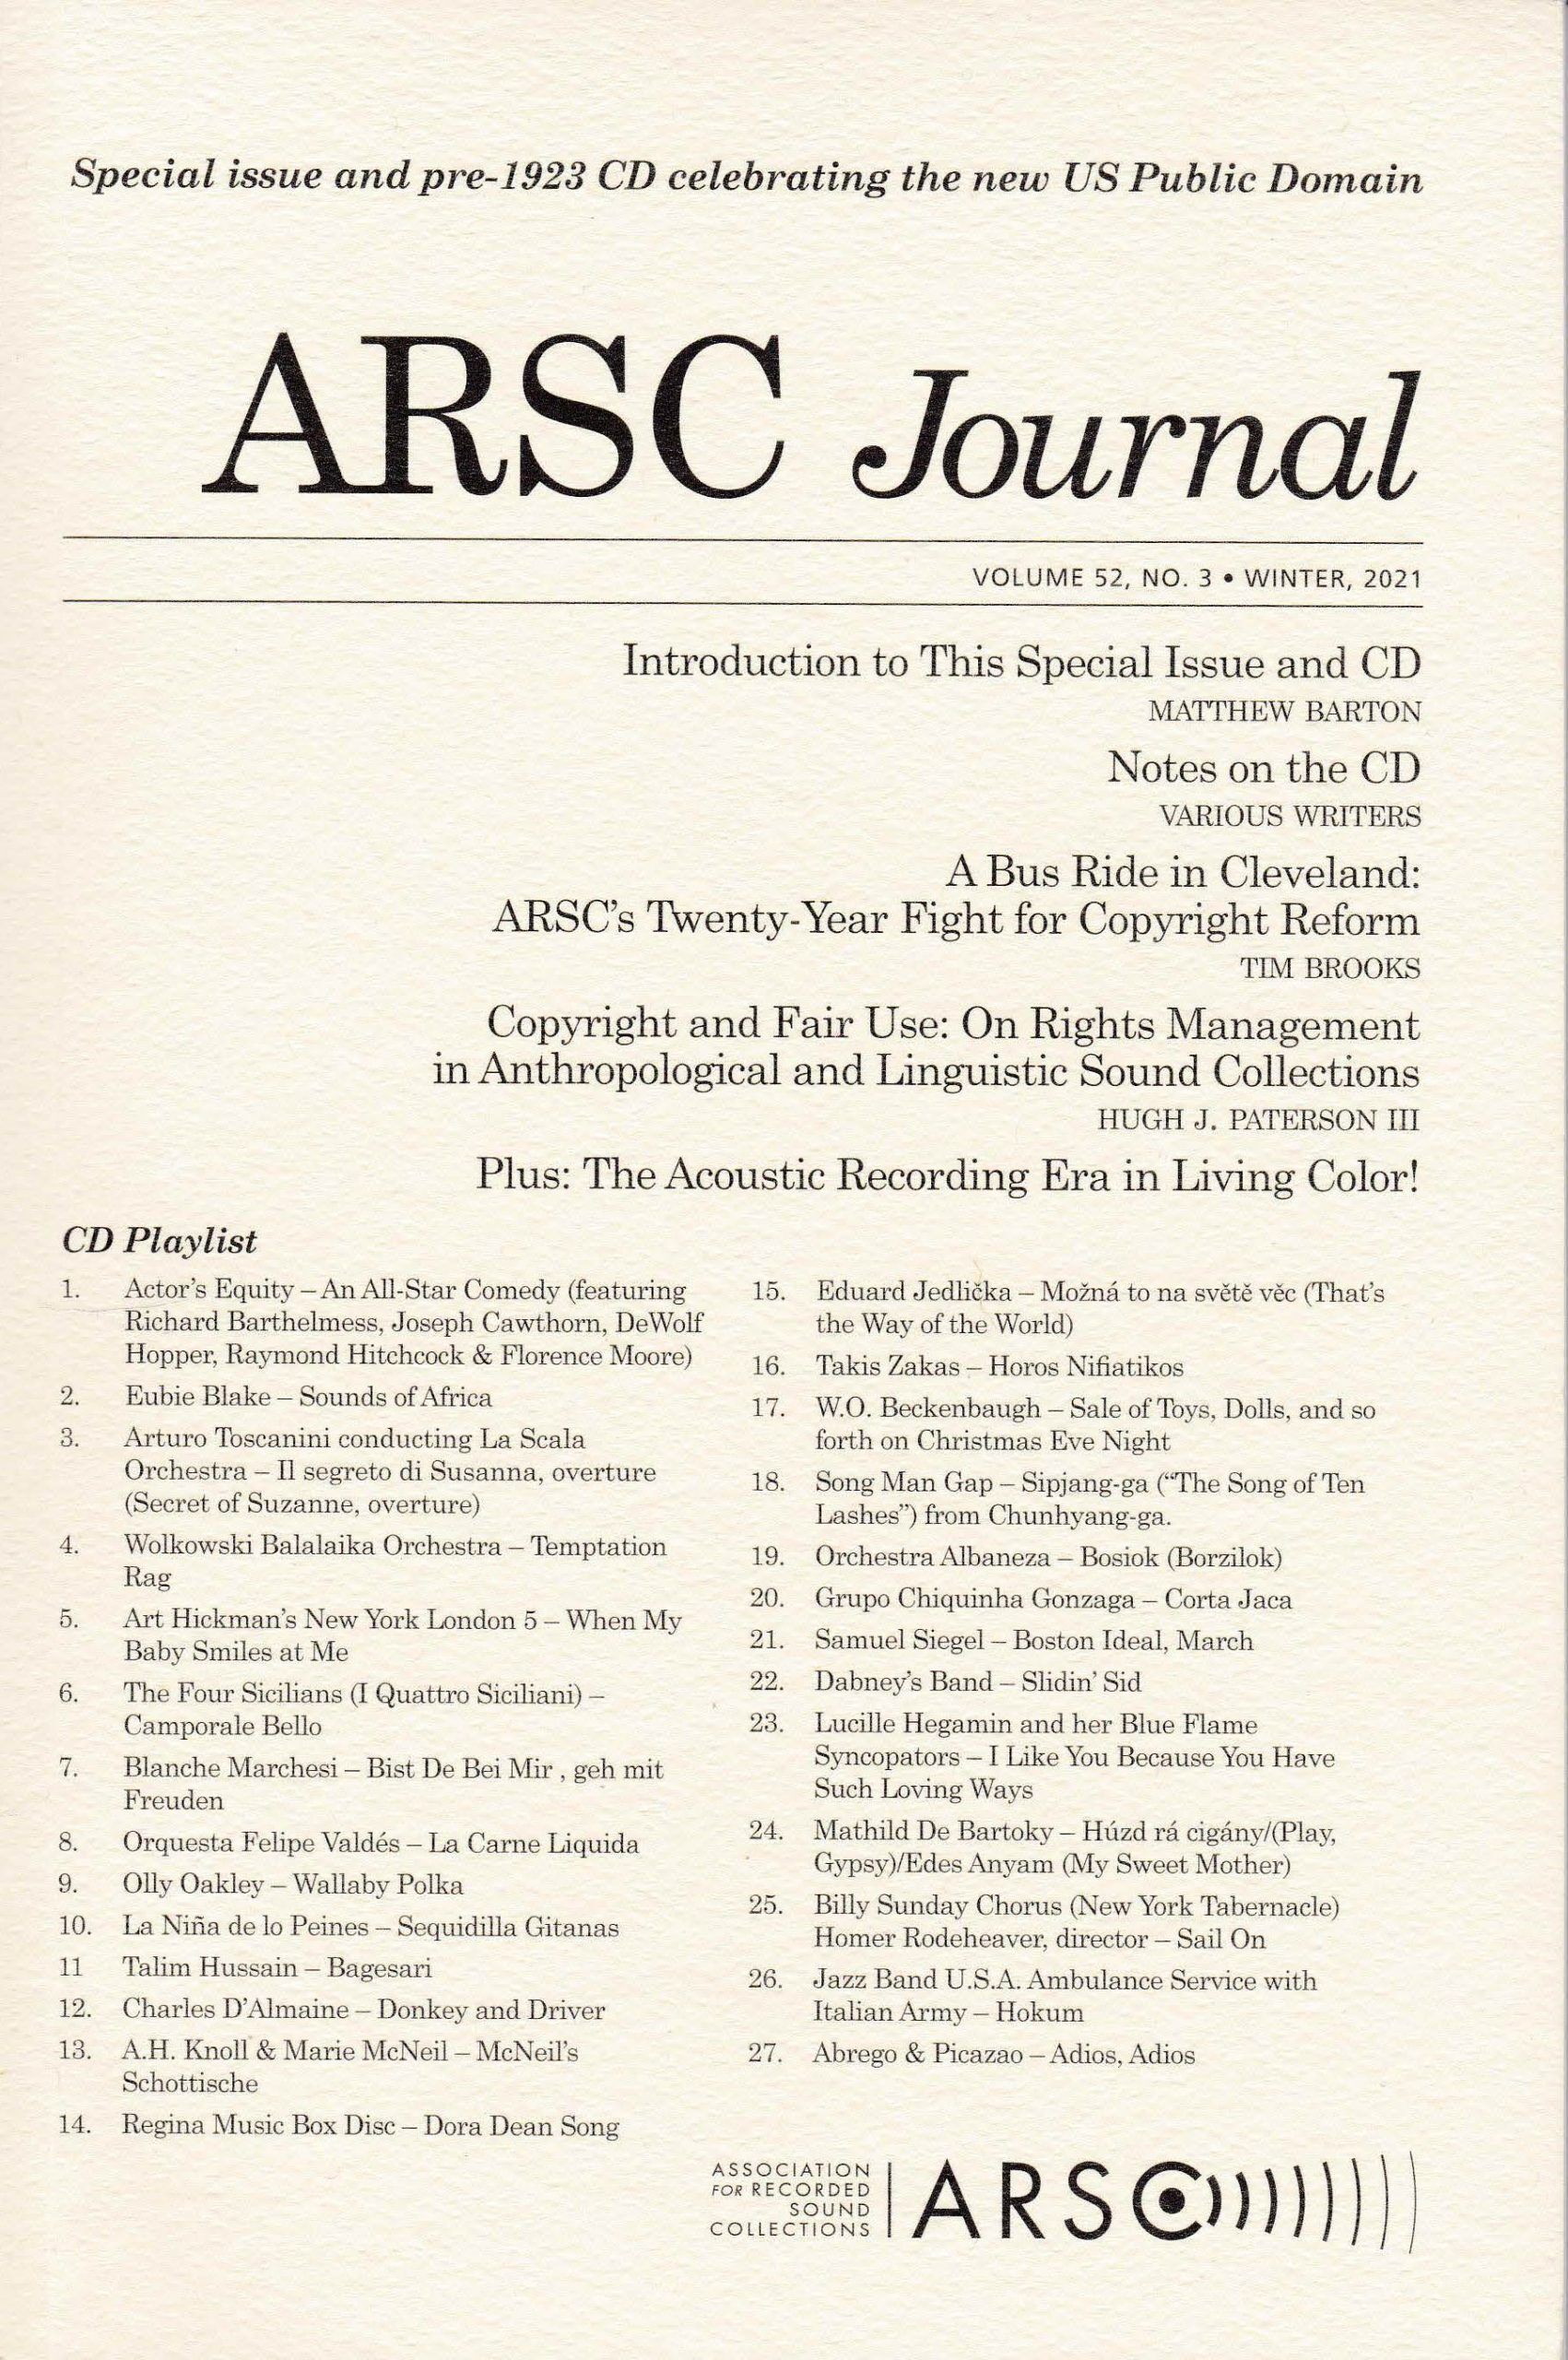 ARSC Journal: Special Issue and Pre-1923 CD Celebrating the new US Public Domain